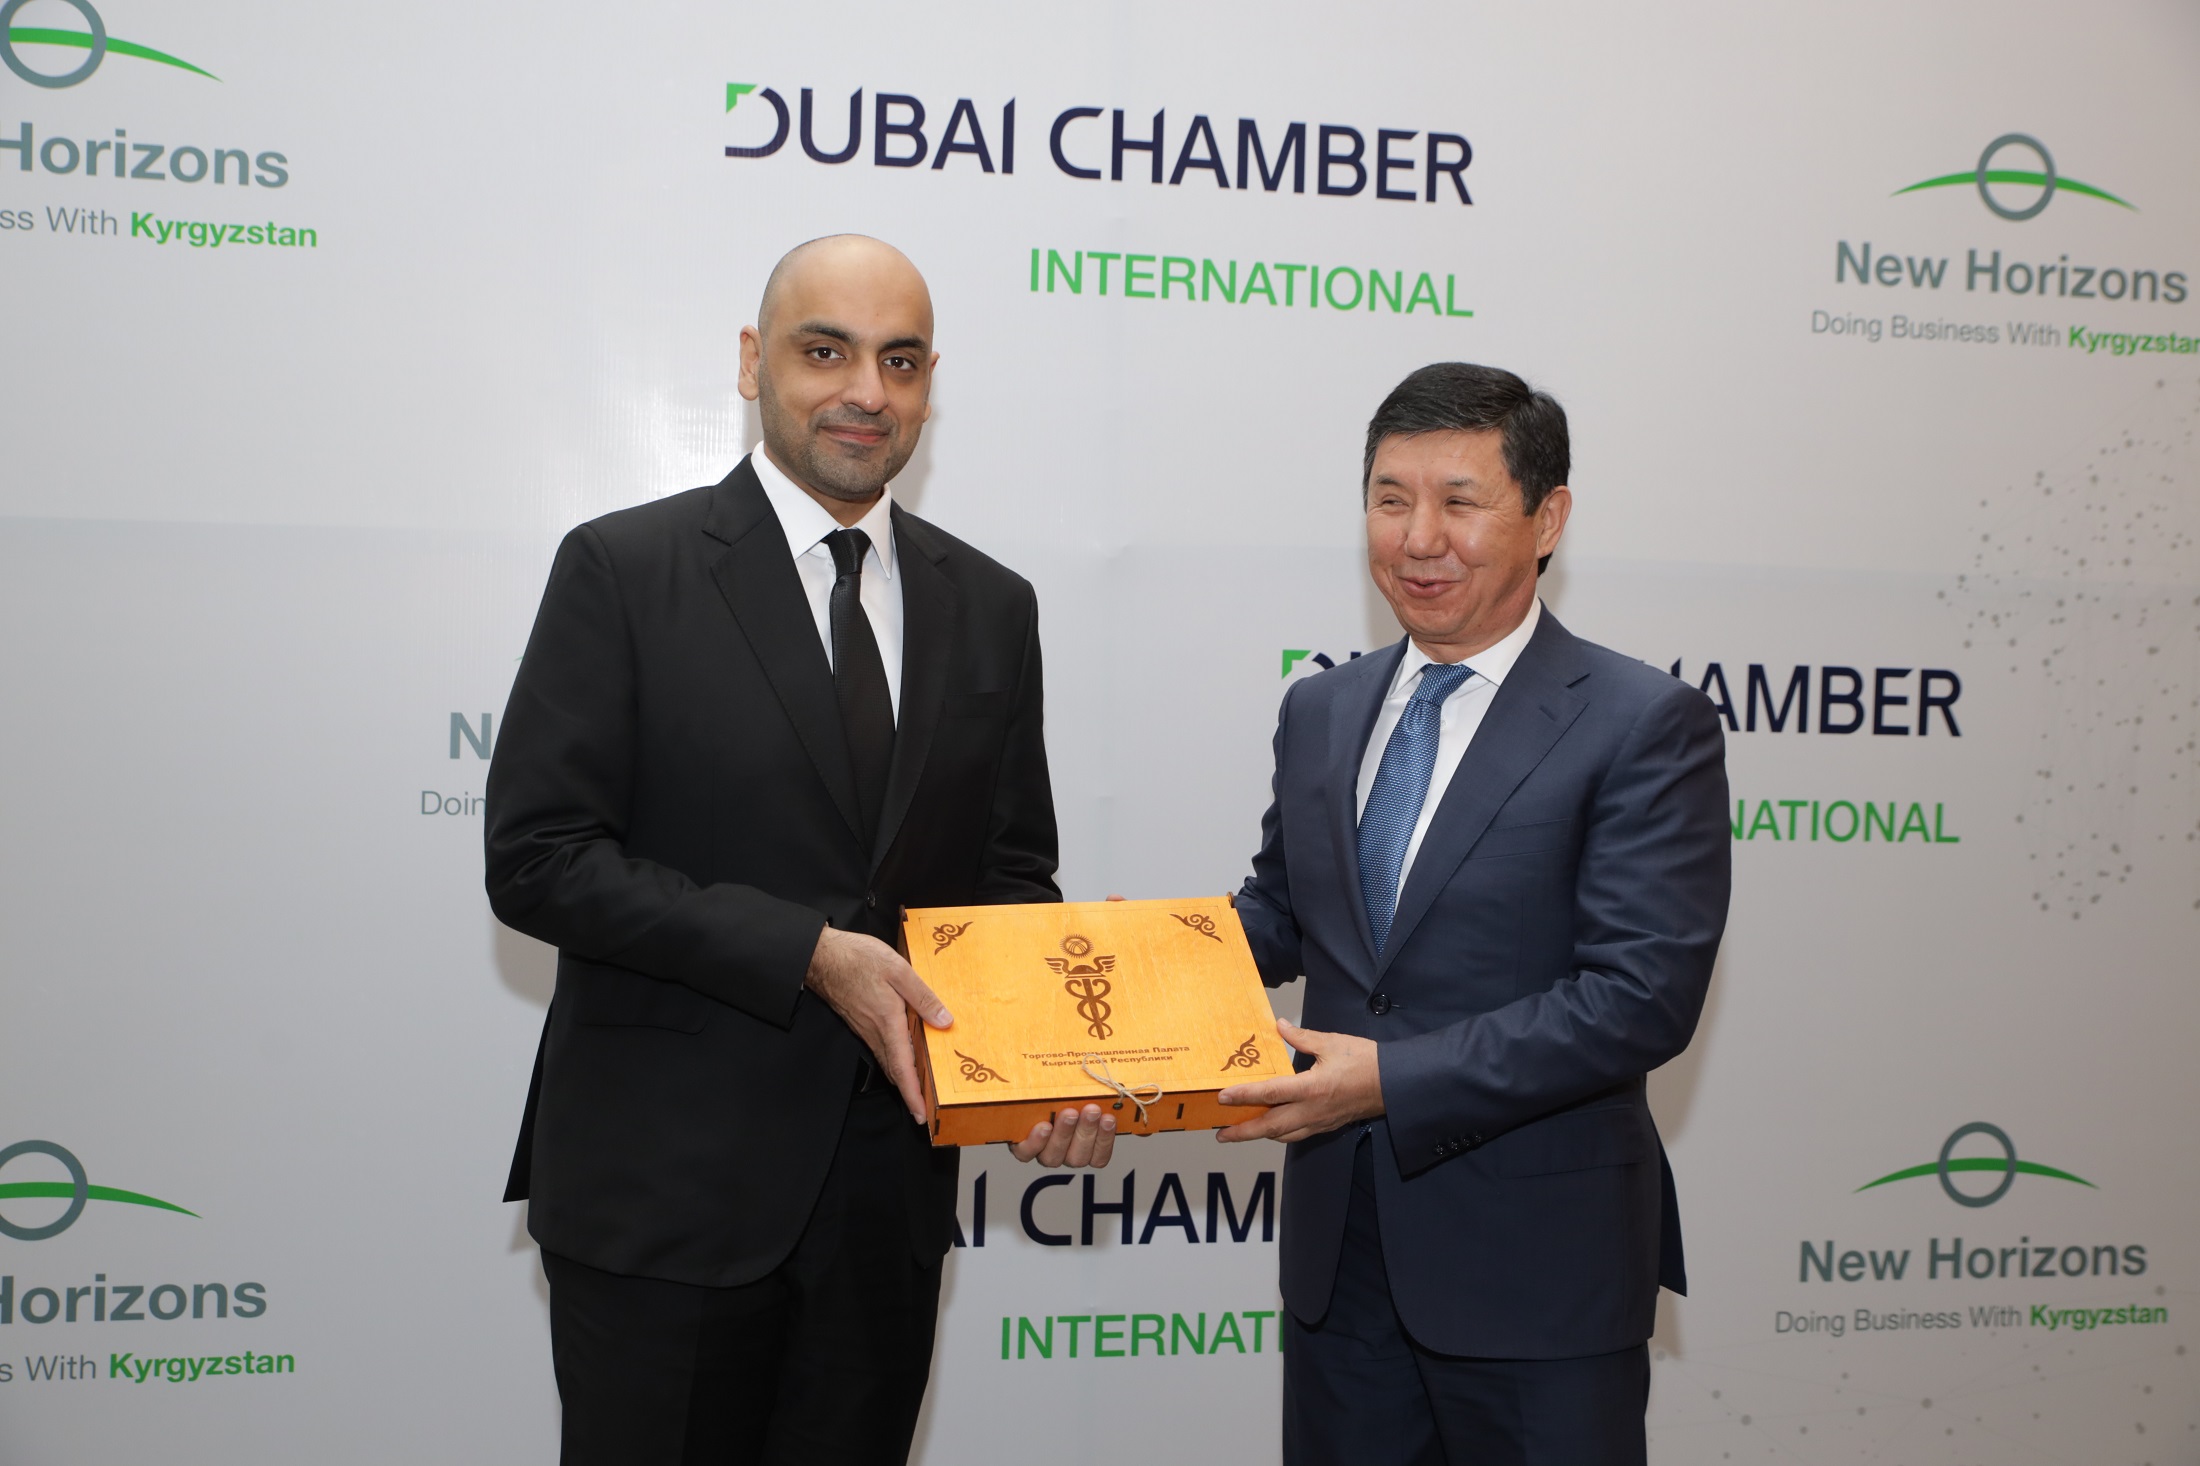 Dubai International Chamber’s New Horizons Trade Mission Concludes in Kyrgyz Republic